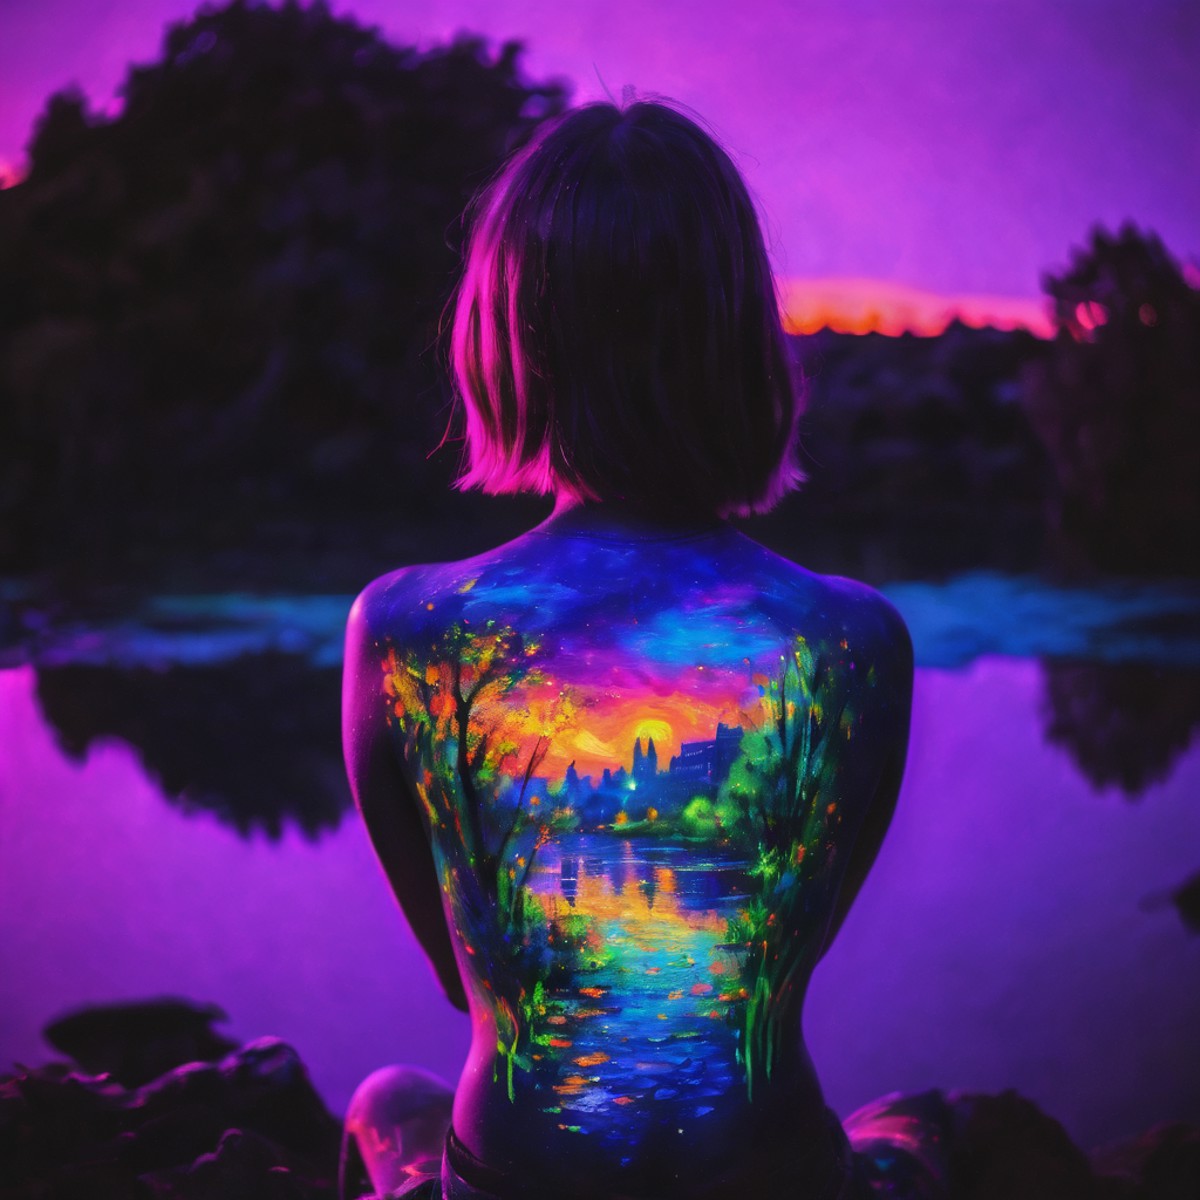 blacklight uv painted on the back of a girl depicting art in the style of monet